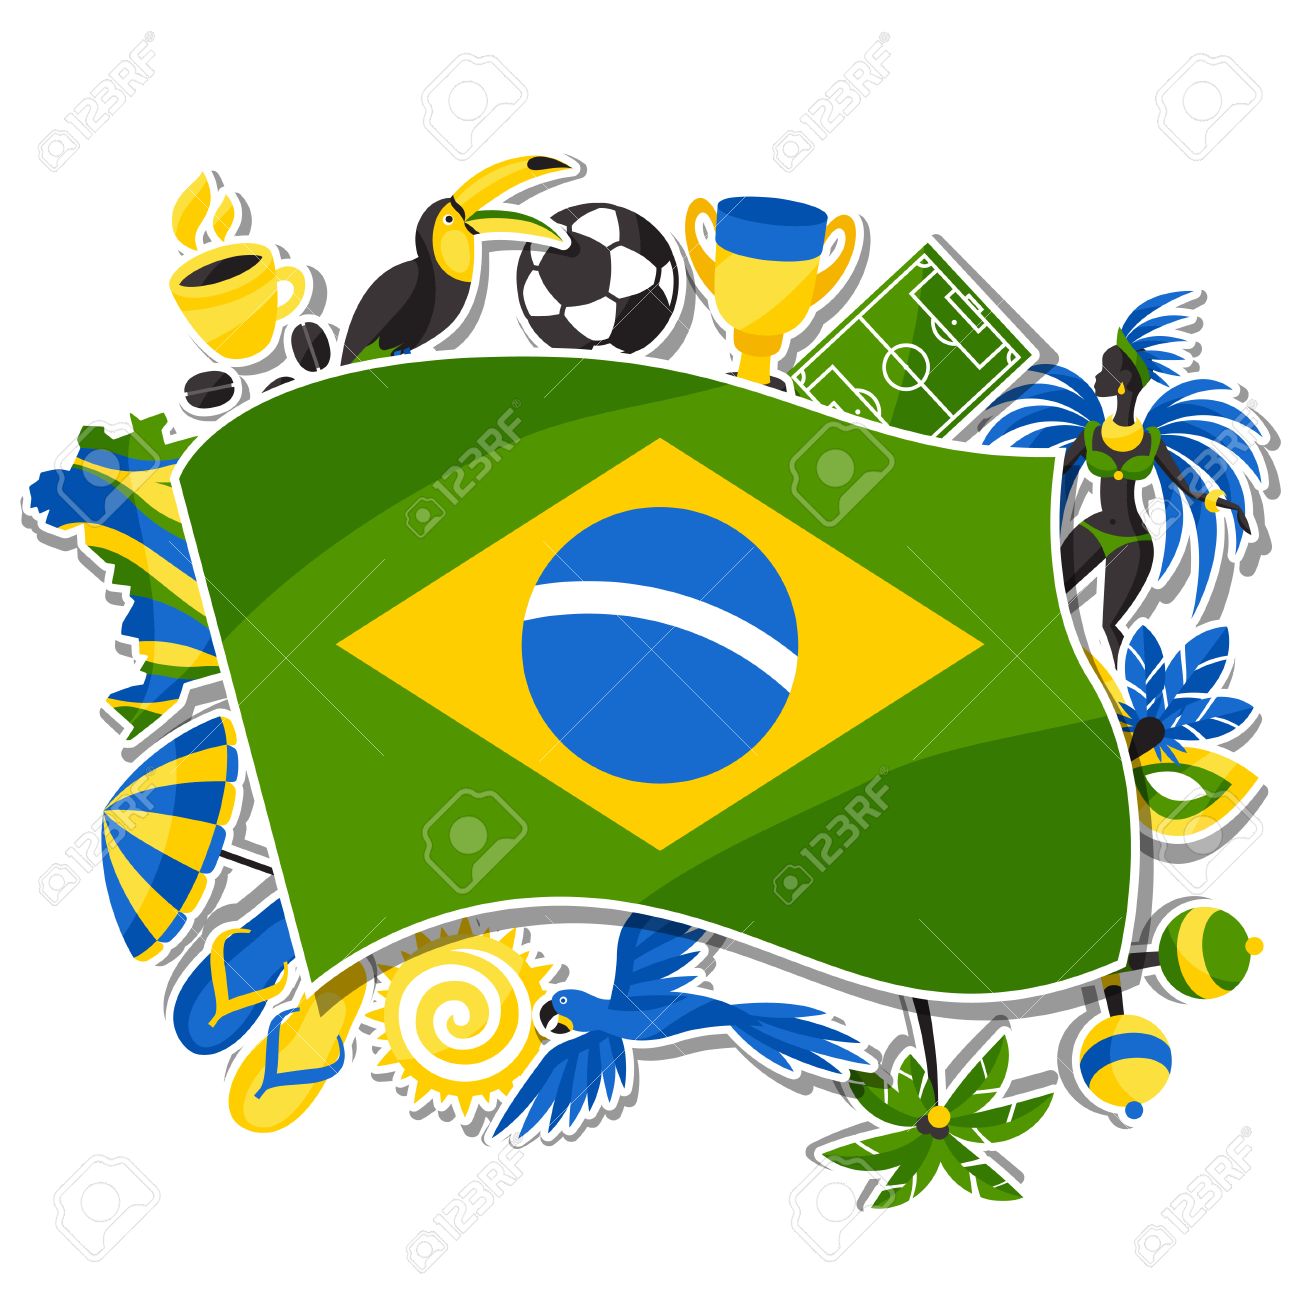 Brazil Background With Sticker Objects And Cultural Symbols